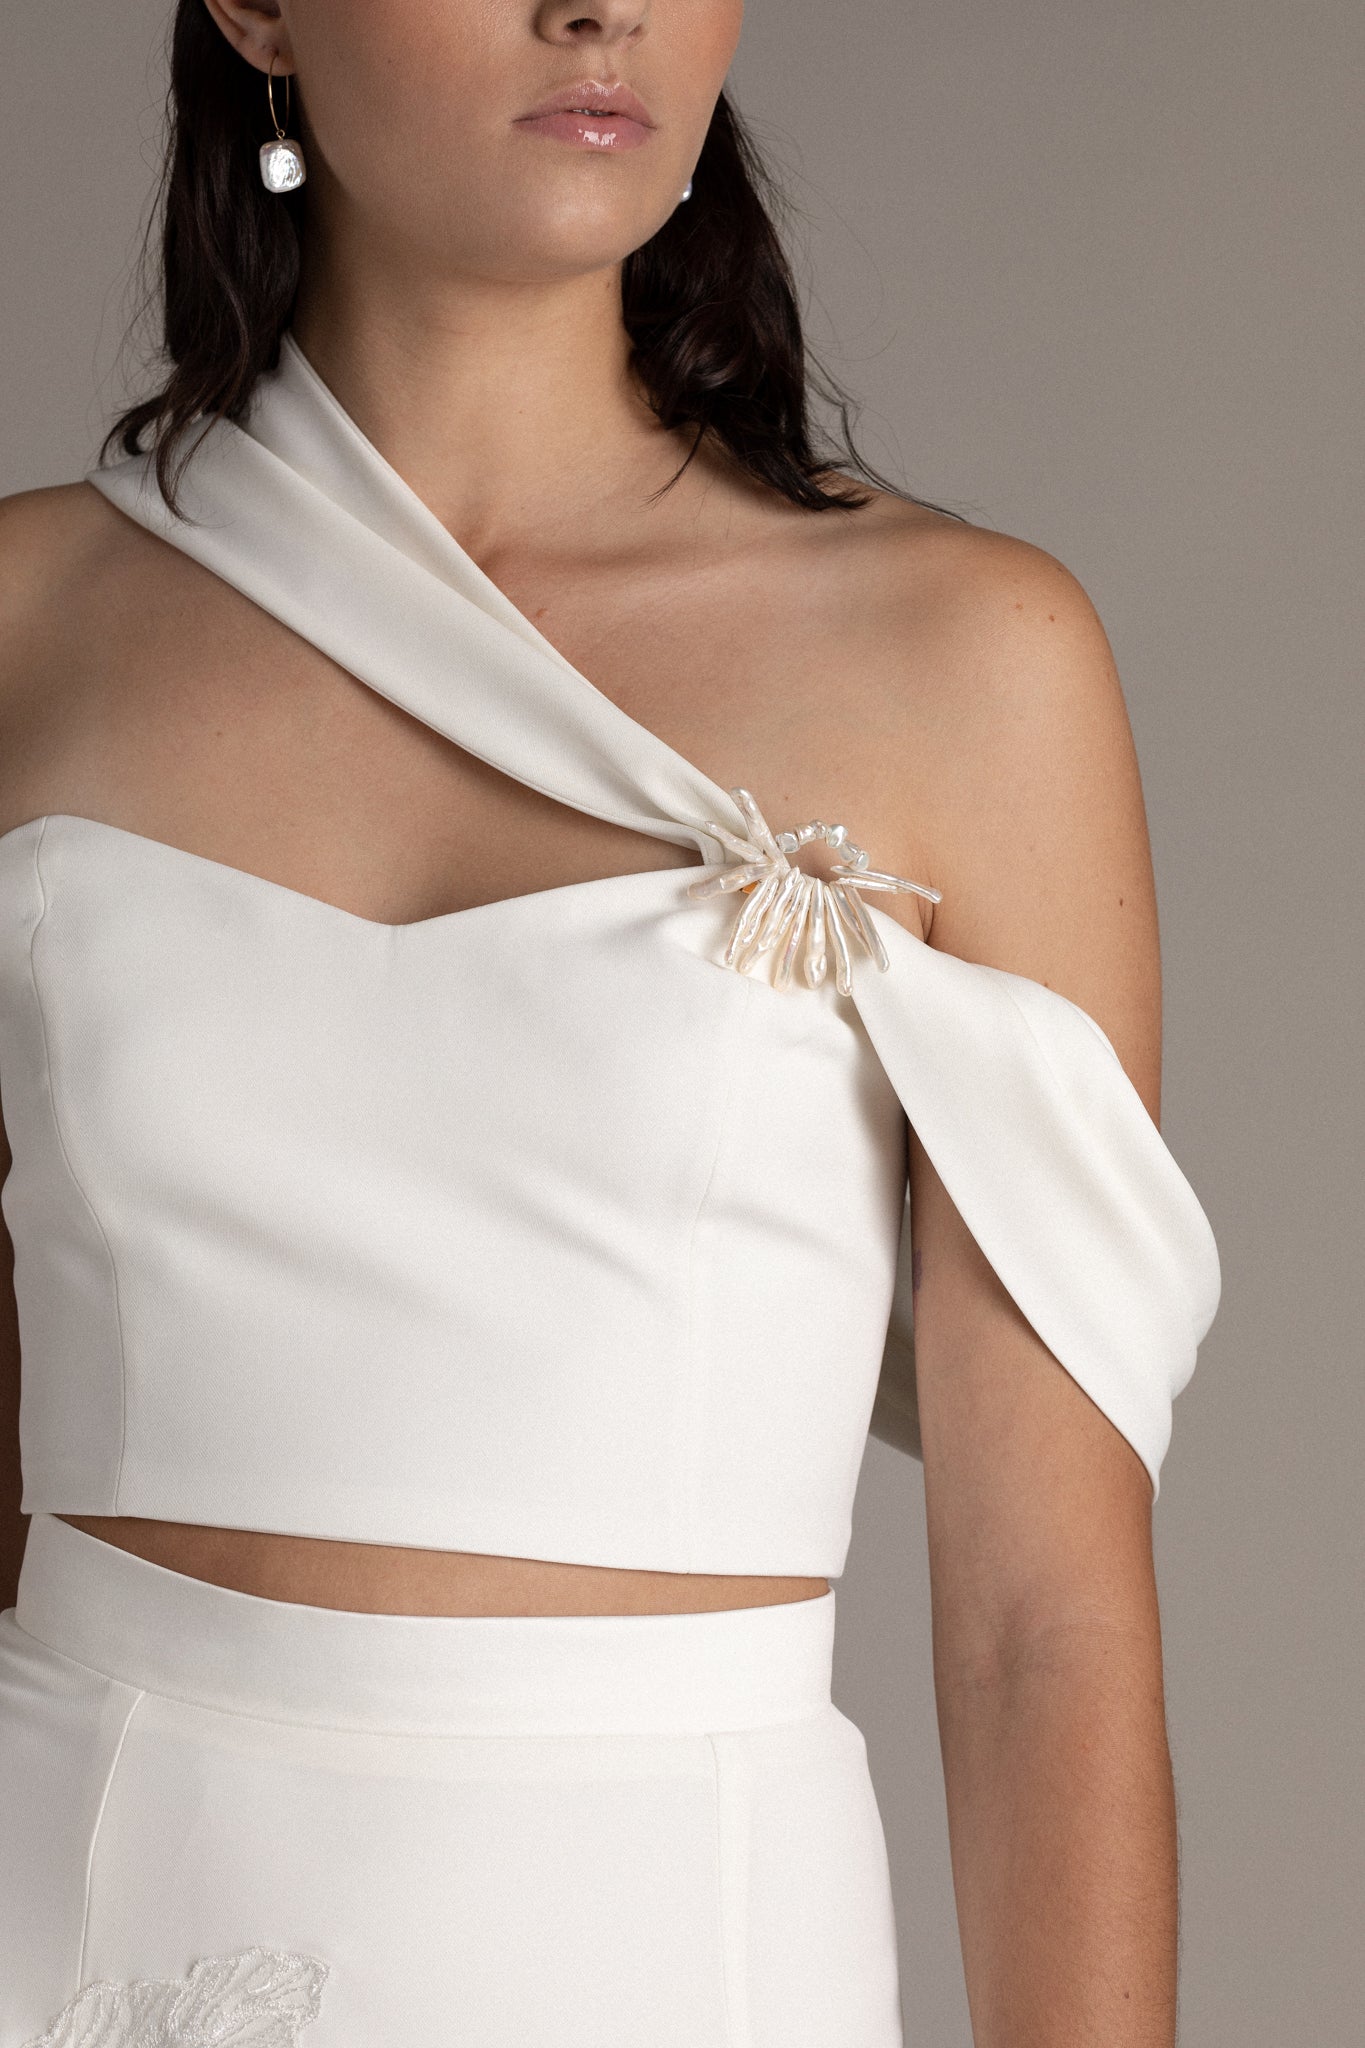 Structured Asymmetric Bodice is a statement piece that commands attention when paired with pants or a skirt. The asymmetric shoulder details create a captivating drape that enhances your silhouette.